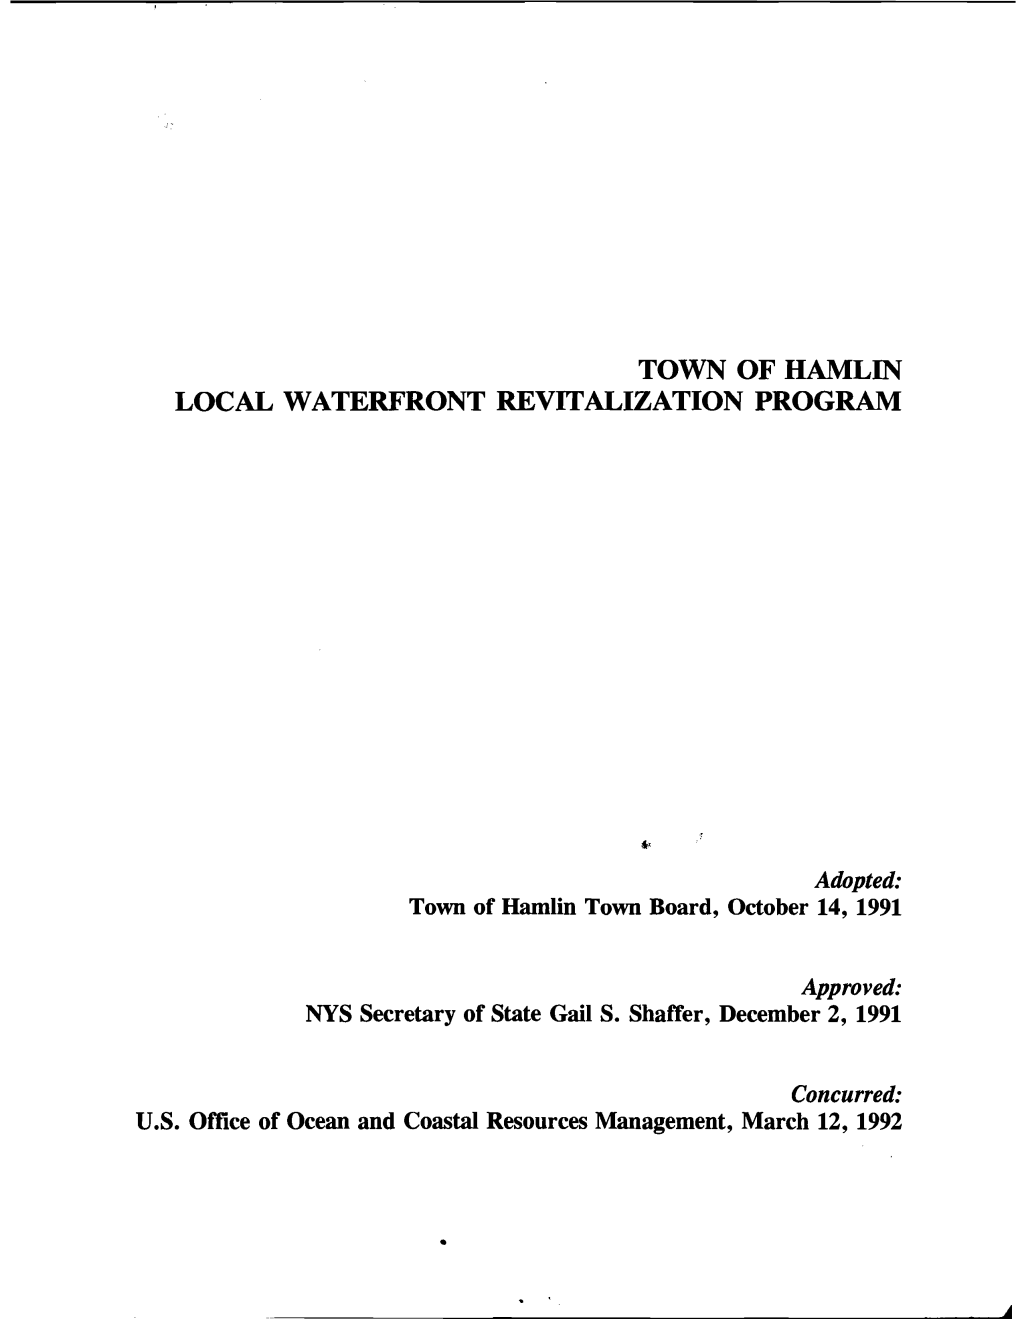 Town of Hamlin LWRP Area, Primarily Using the Following Sources